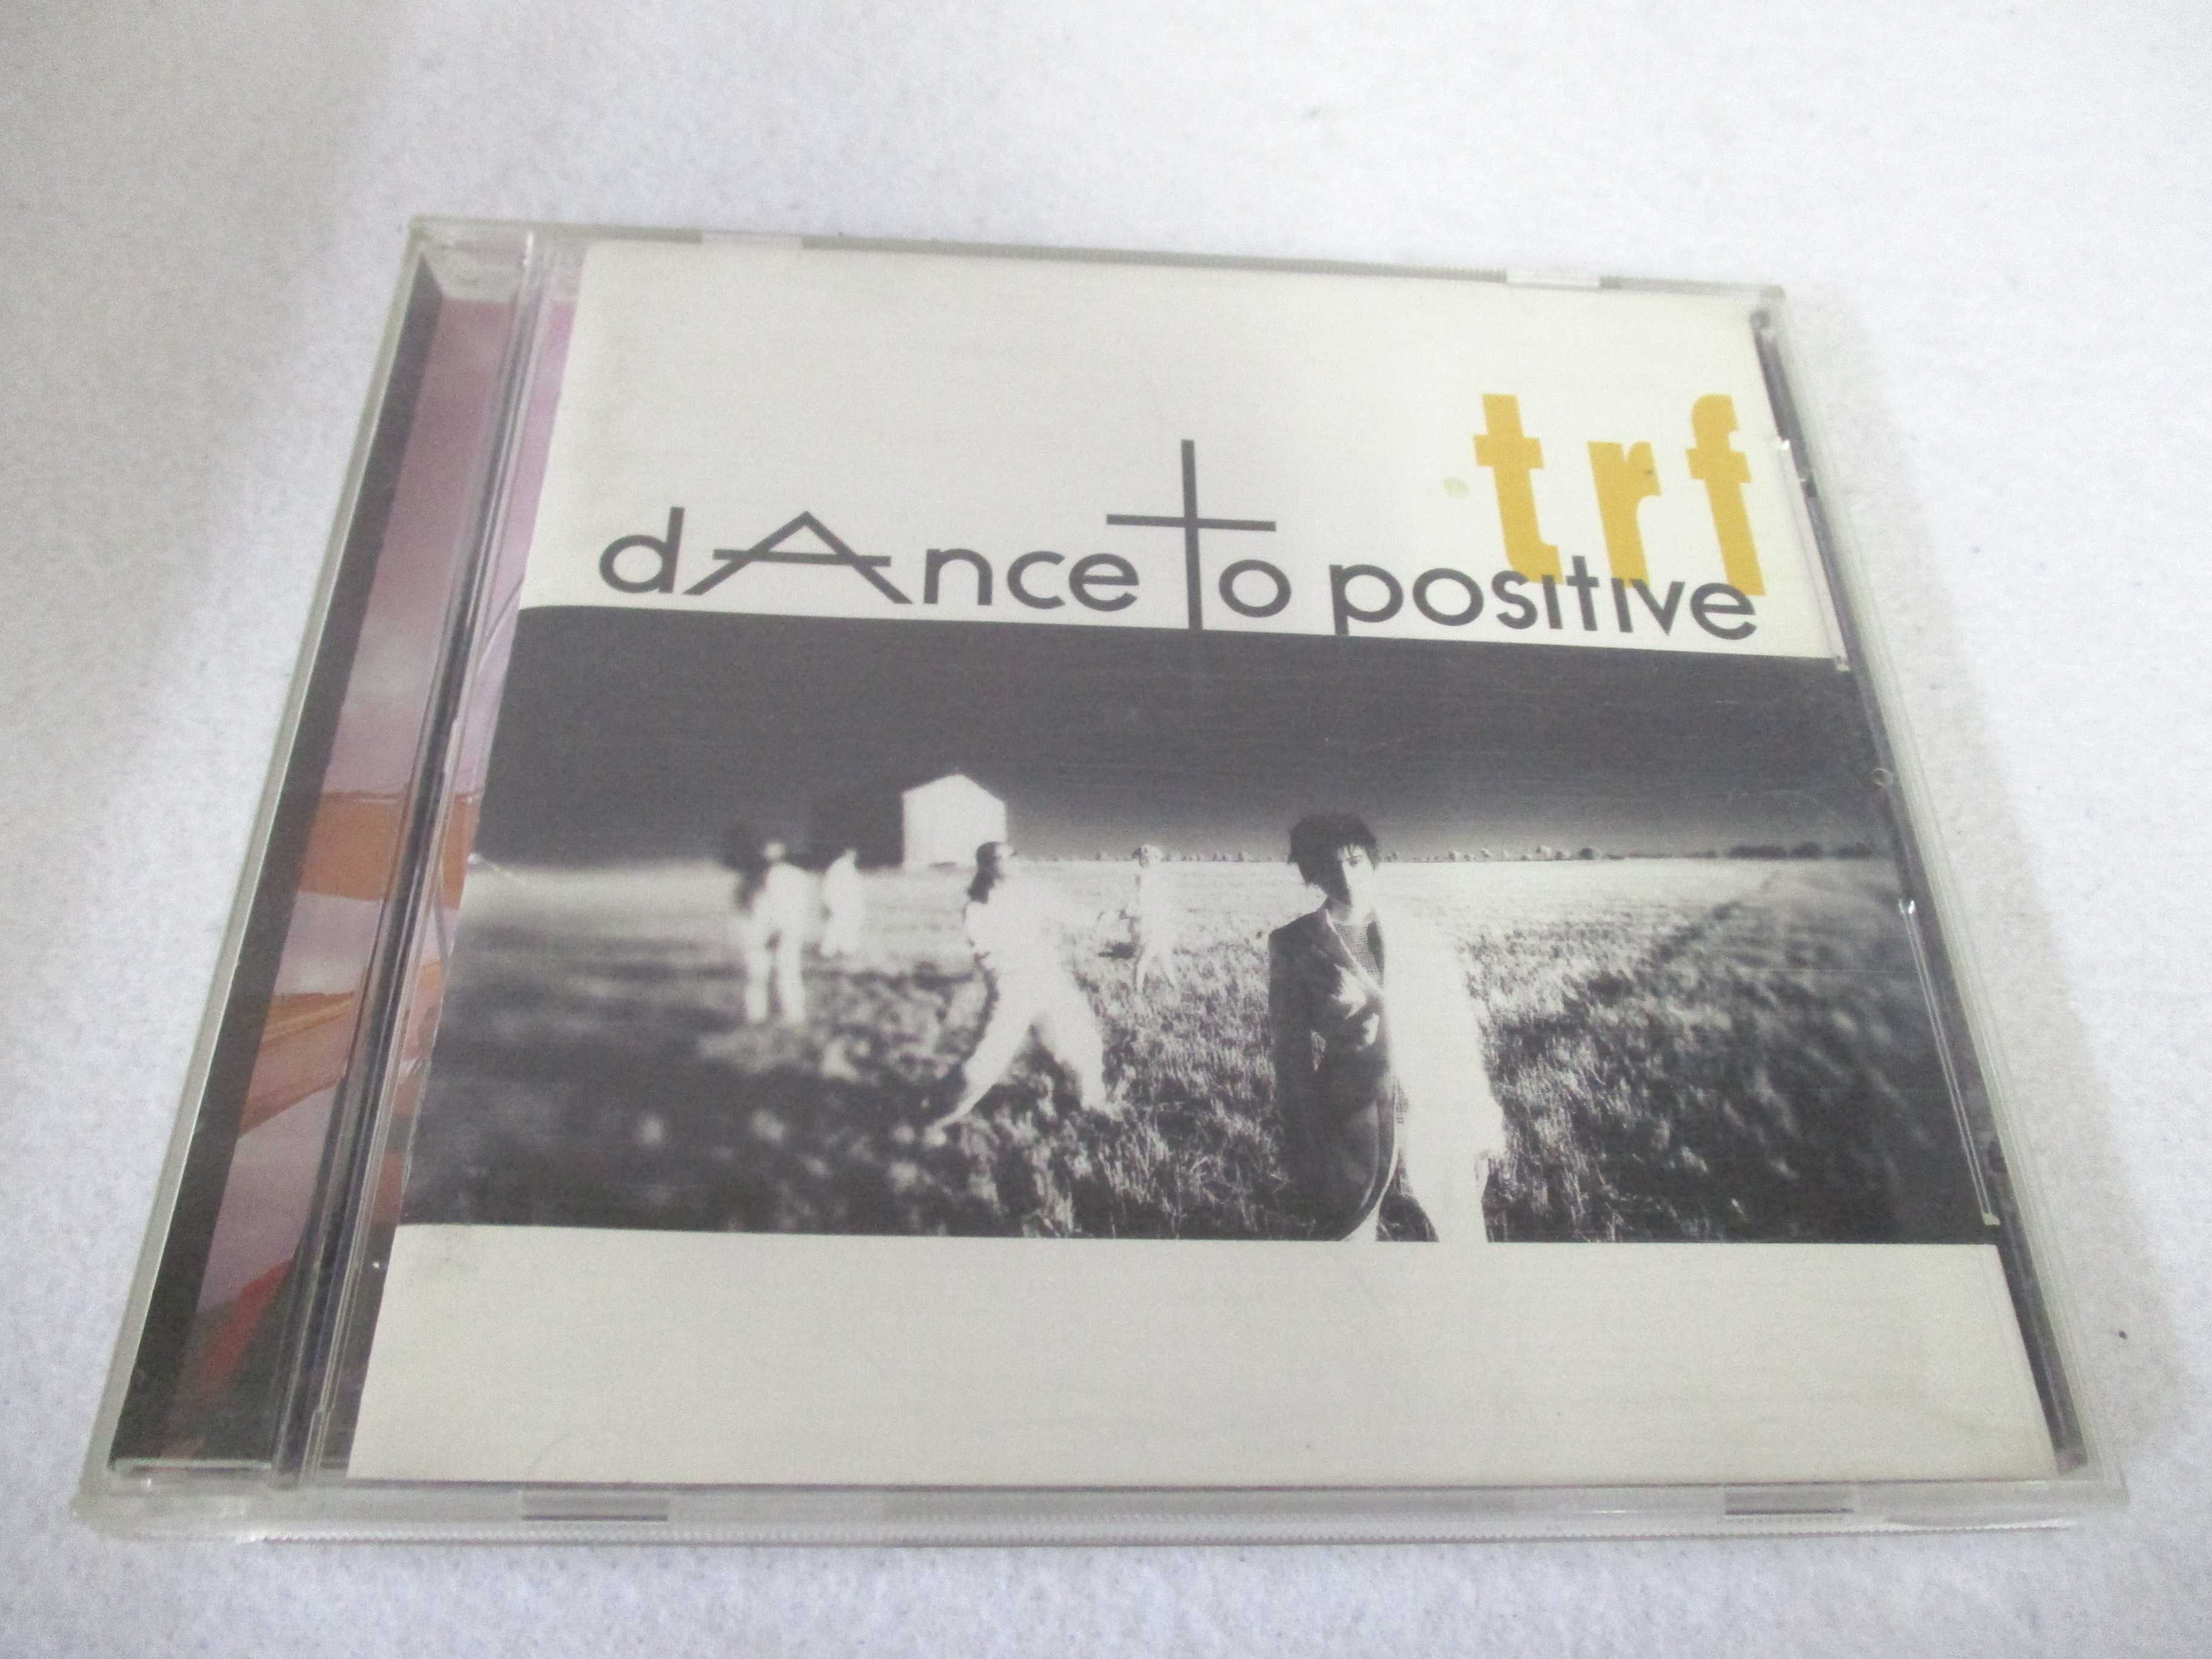 AC05855【中古】 【CD】 dAnce to positive/trf